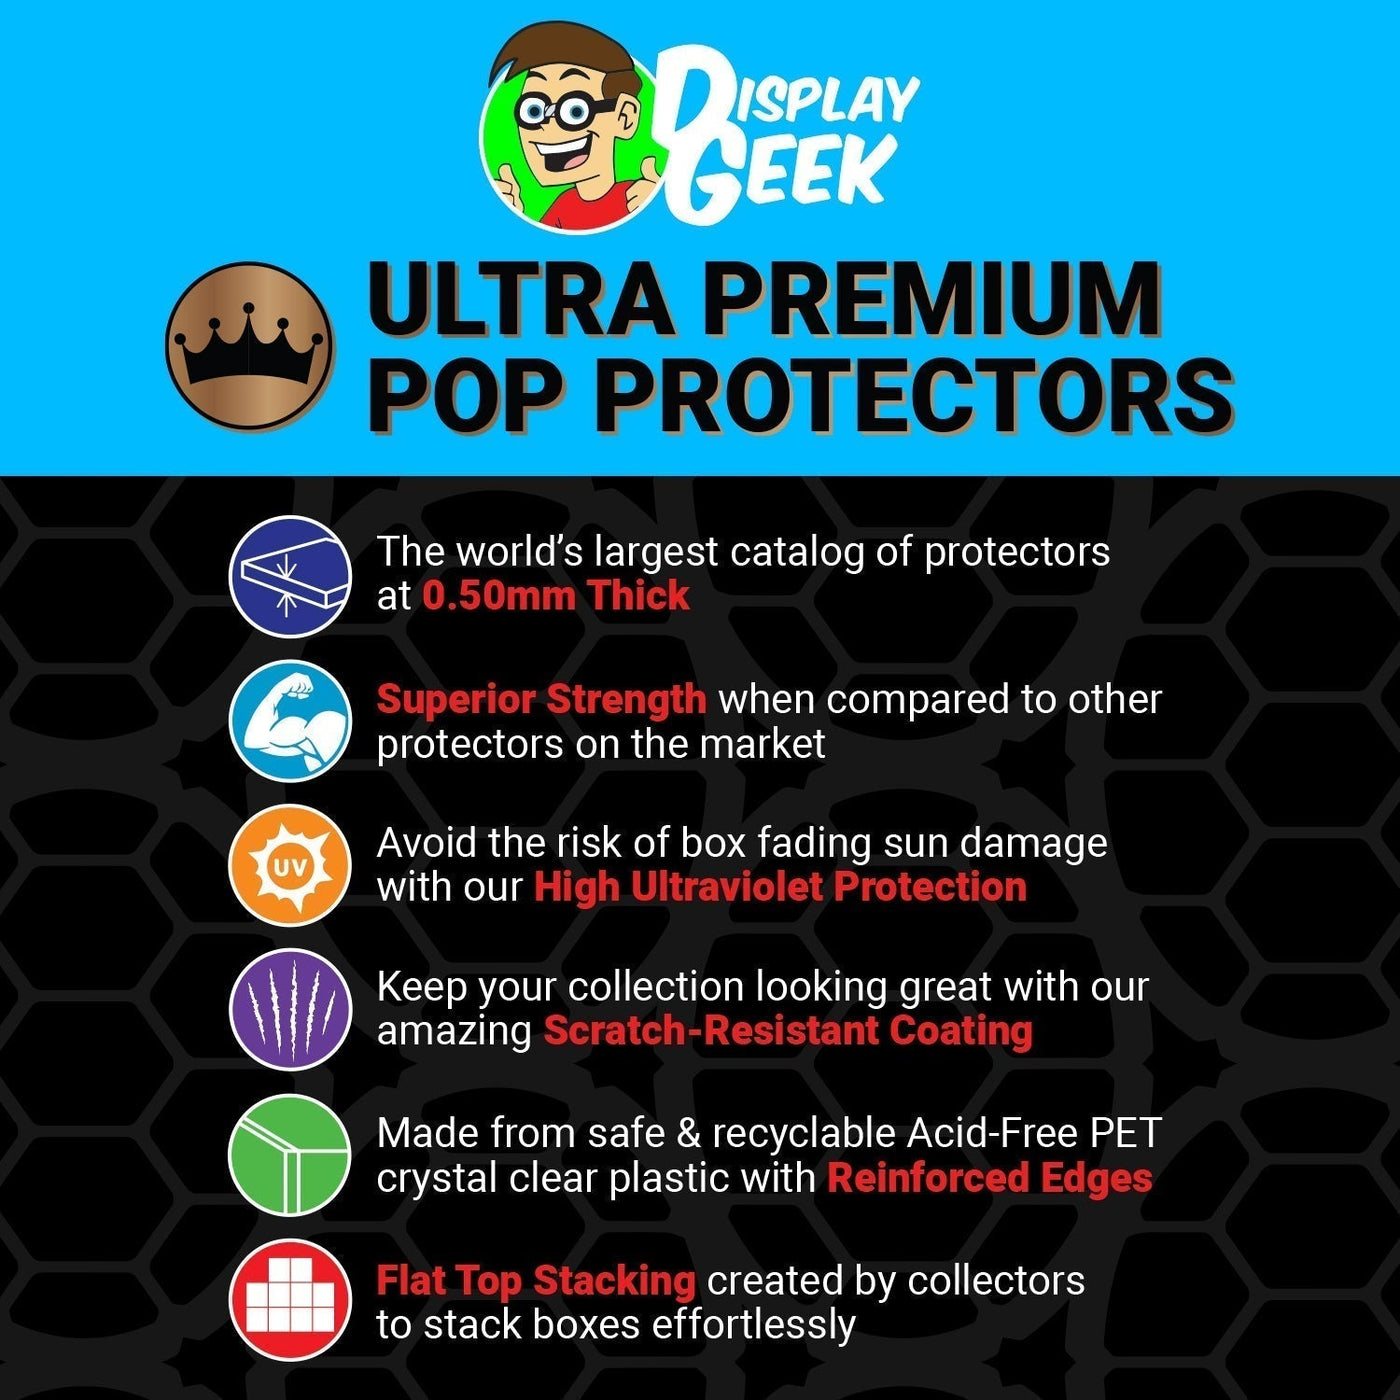 Pop Protector for 6 inch Fatgum HLB Baseball Metallic #1332 Super Size Funko Pop on The Protector Guide App by Display Geek